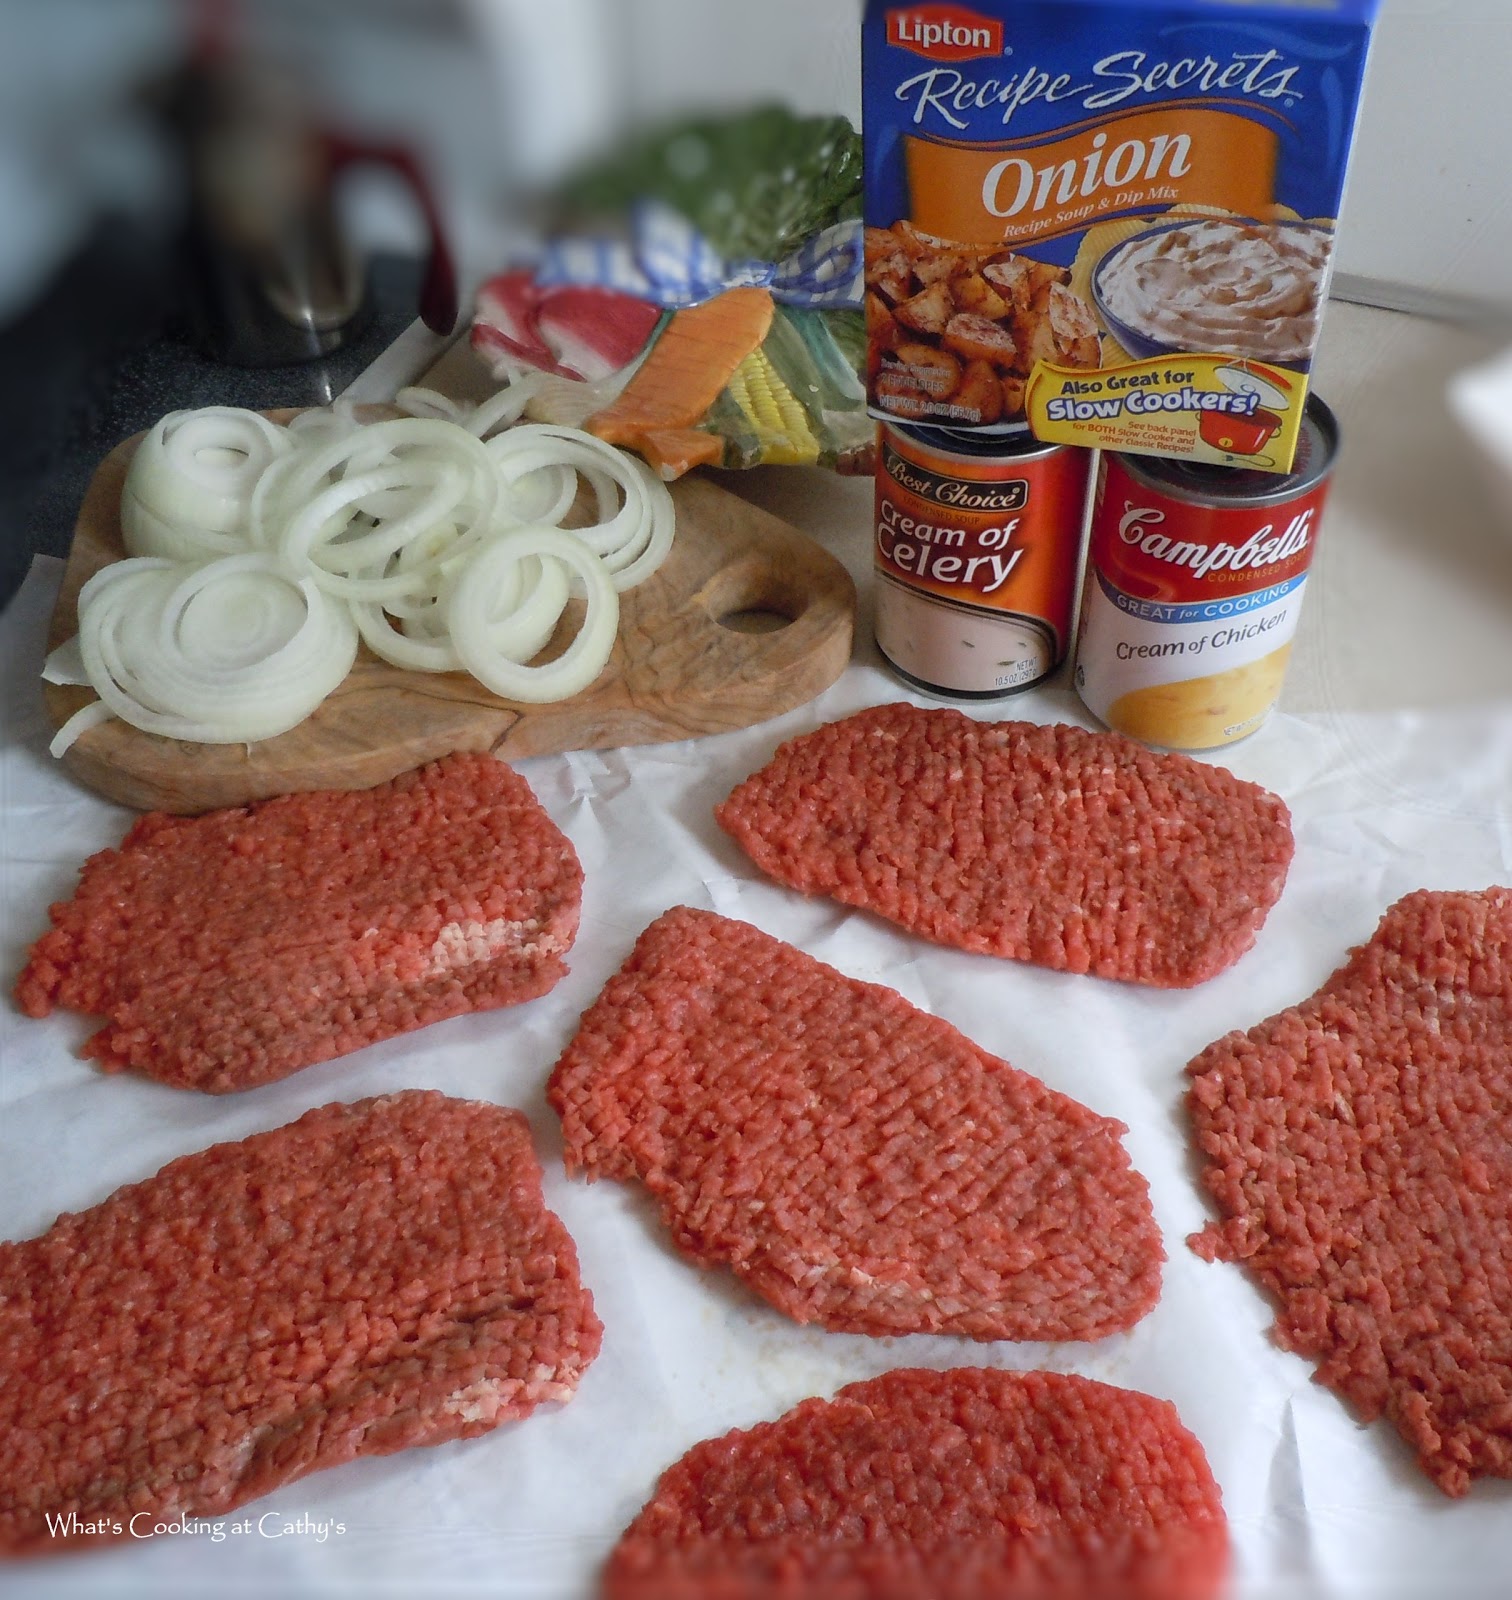 What's Cooking At Cathy's?: Crock-pot Cube Steak